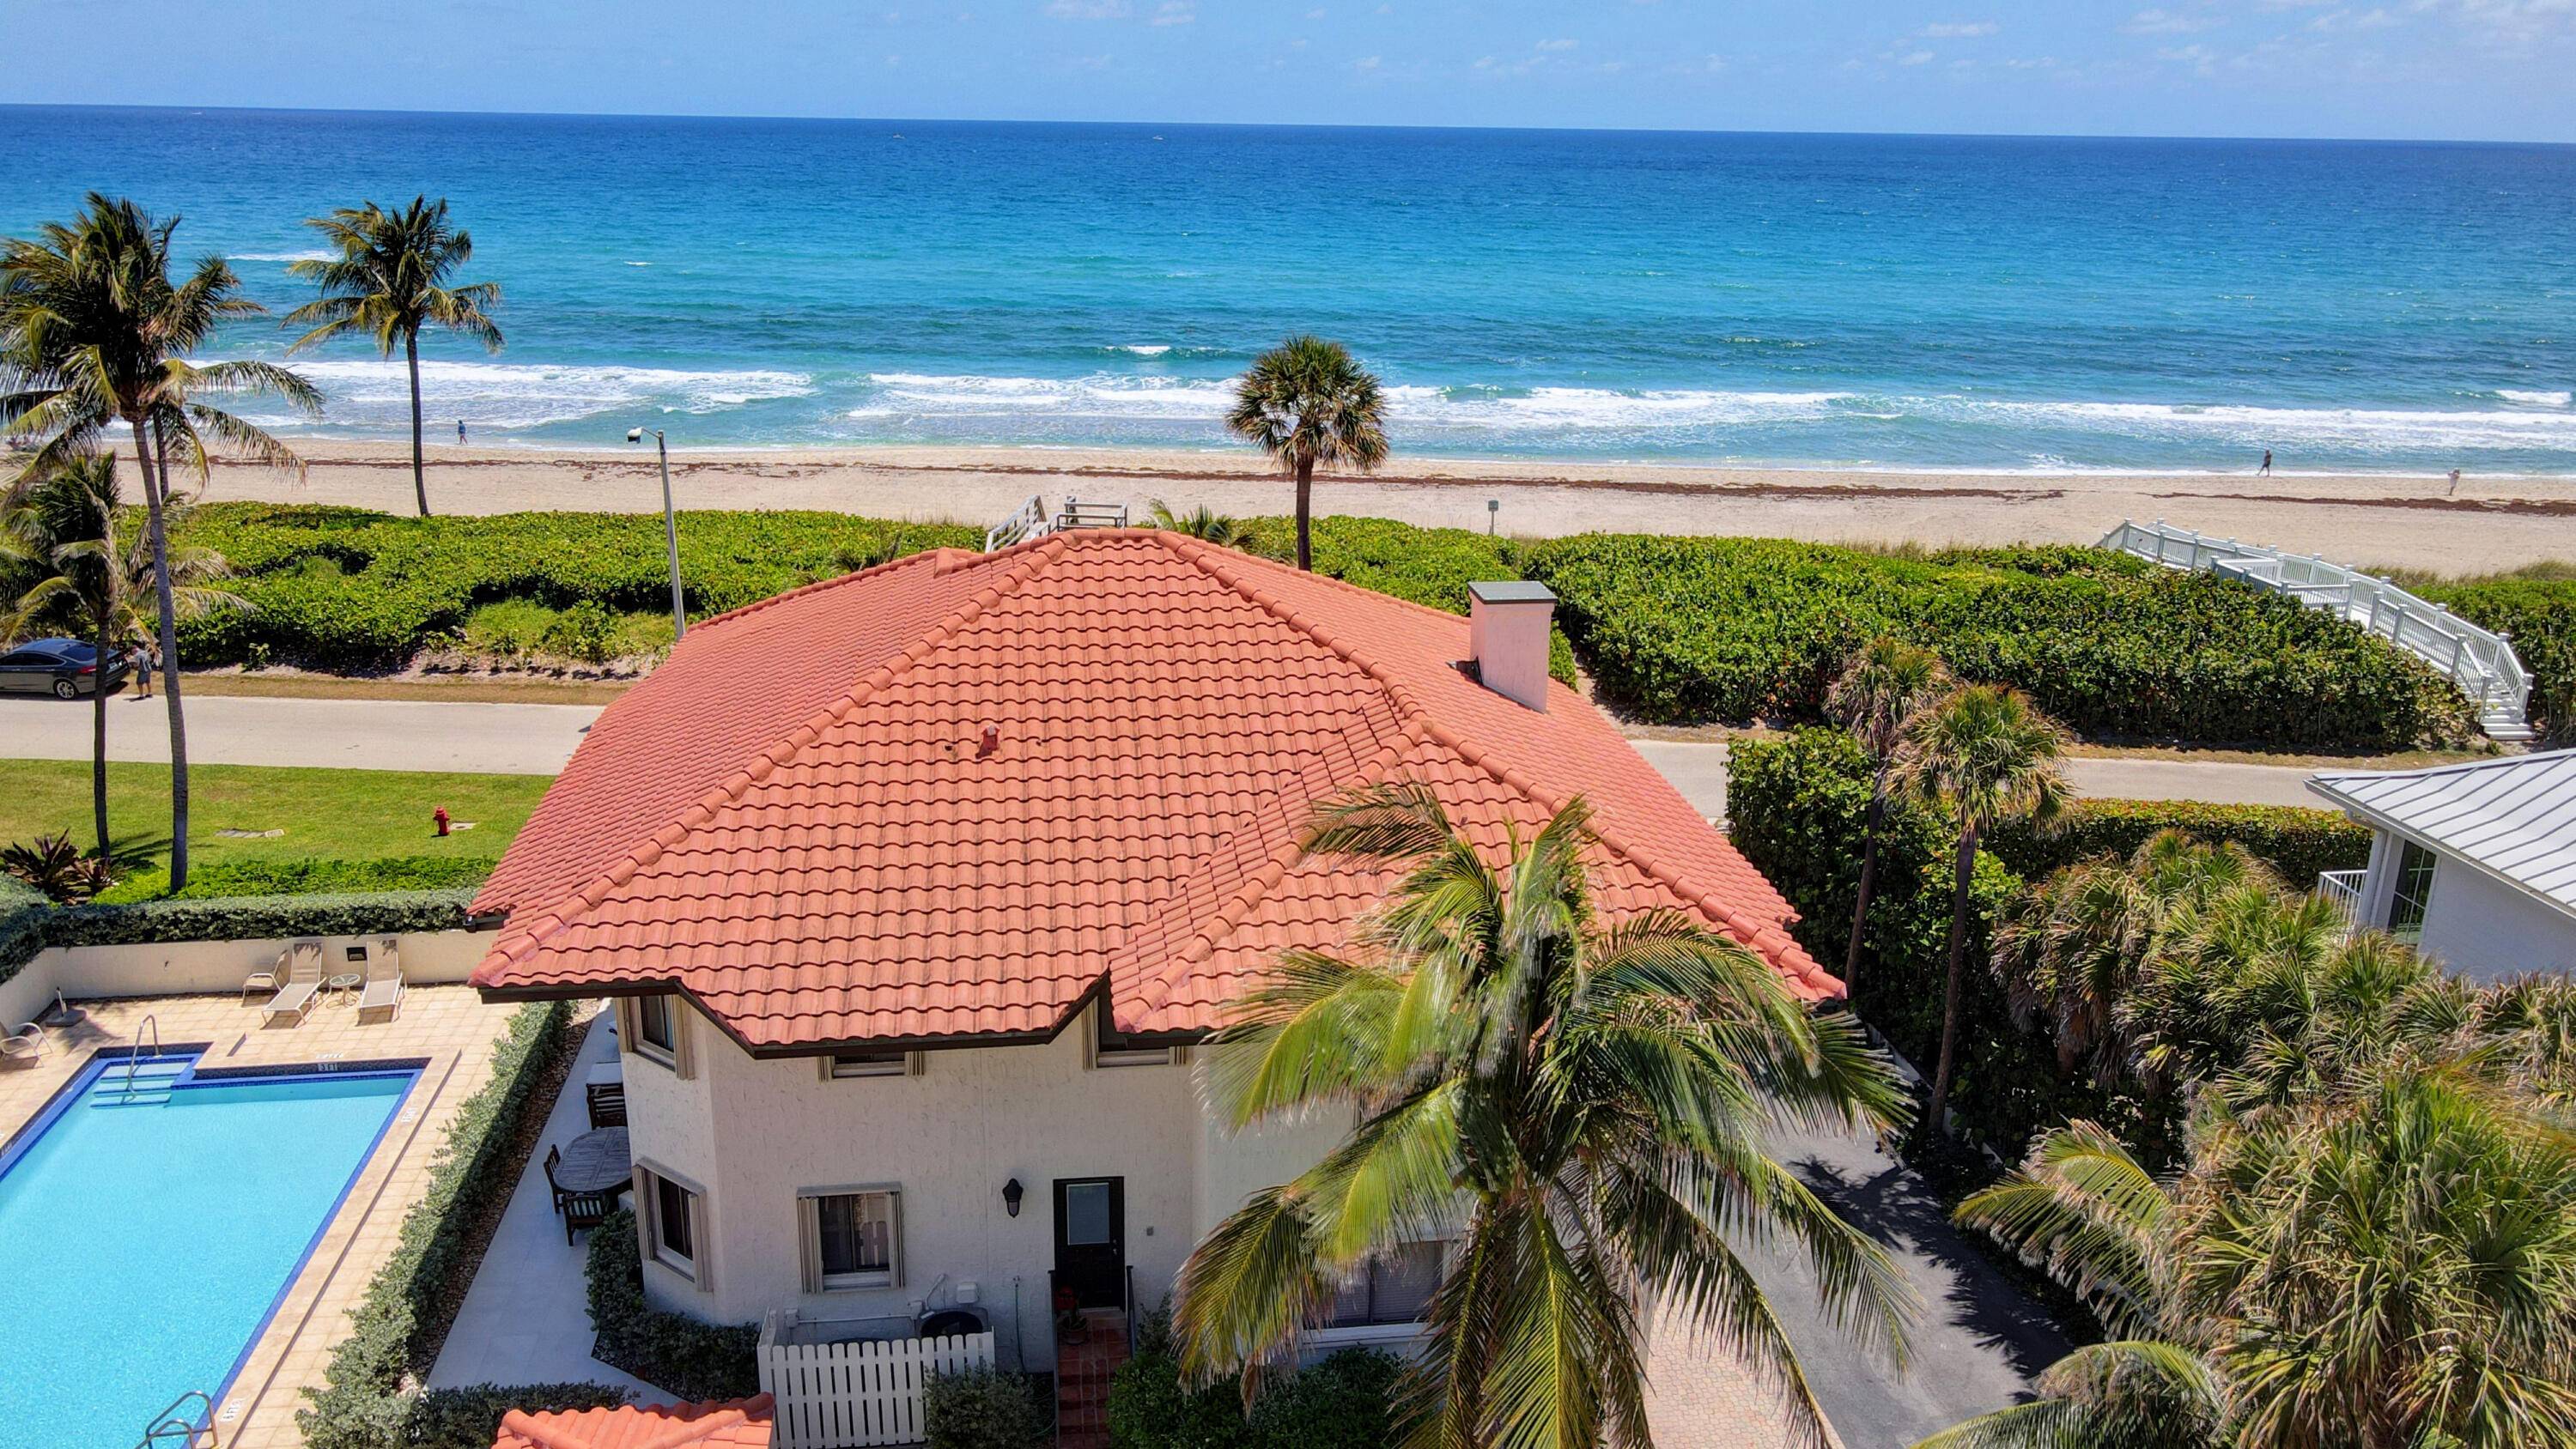 Great opportunity to rent in Diamond Beach community, a boutique enclave with its private beach, on a quiet and pedestrian friendly Old Ocean Blvd in Ocean Ridge.